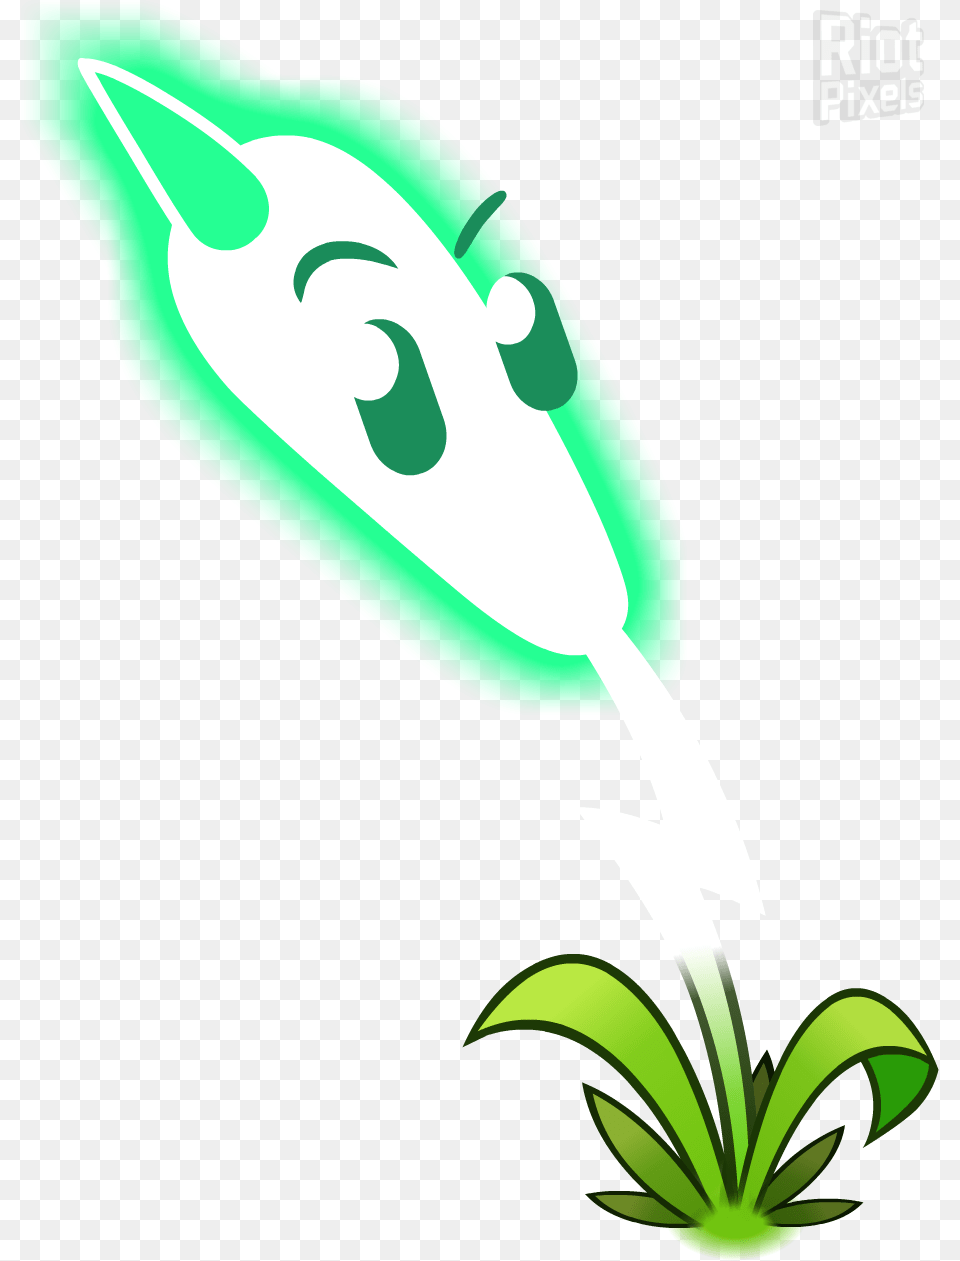 Plants Vs Zombies 2 Electric, Art, Graphics, Green, Flower Png